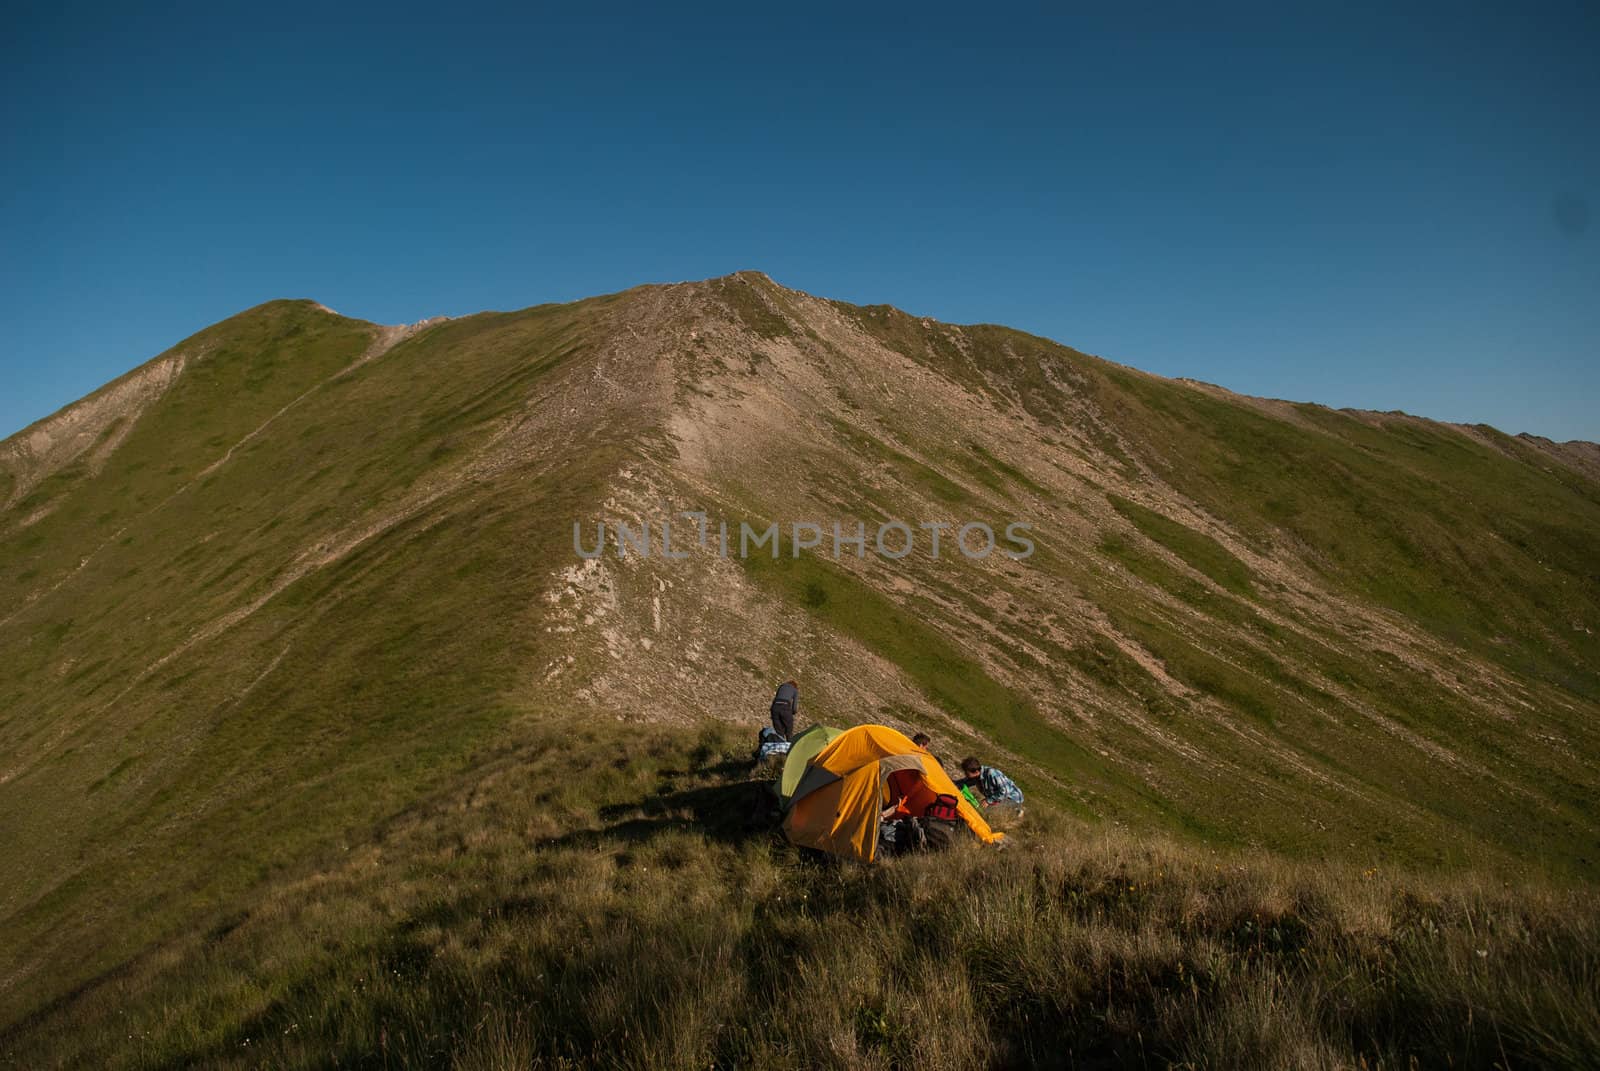 Camp in Caucasian mountains in summer, South Ossetia